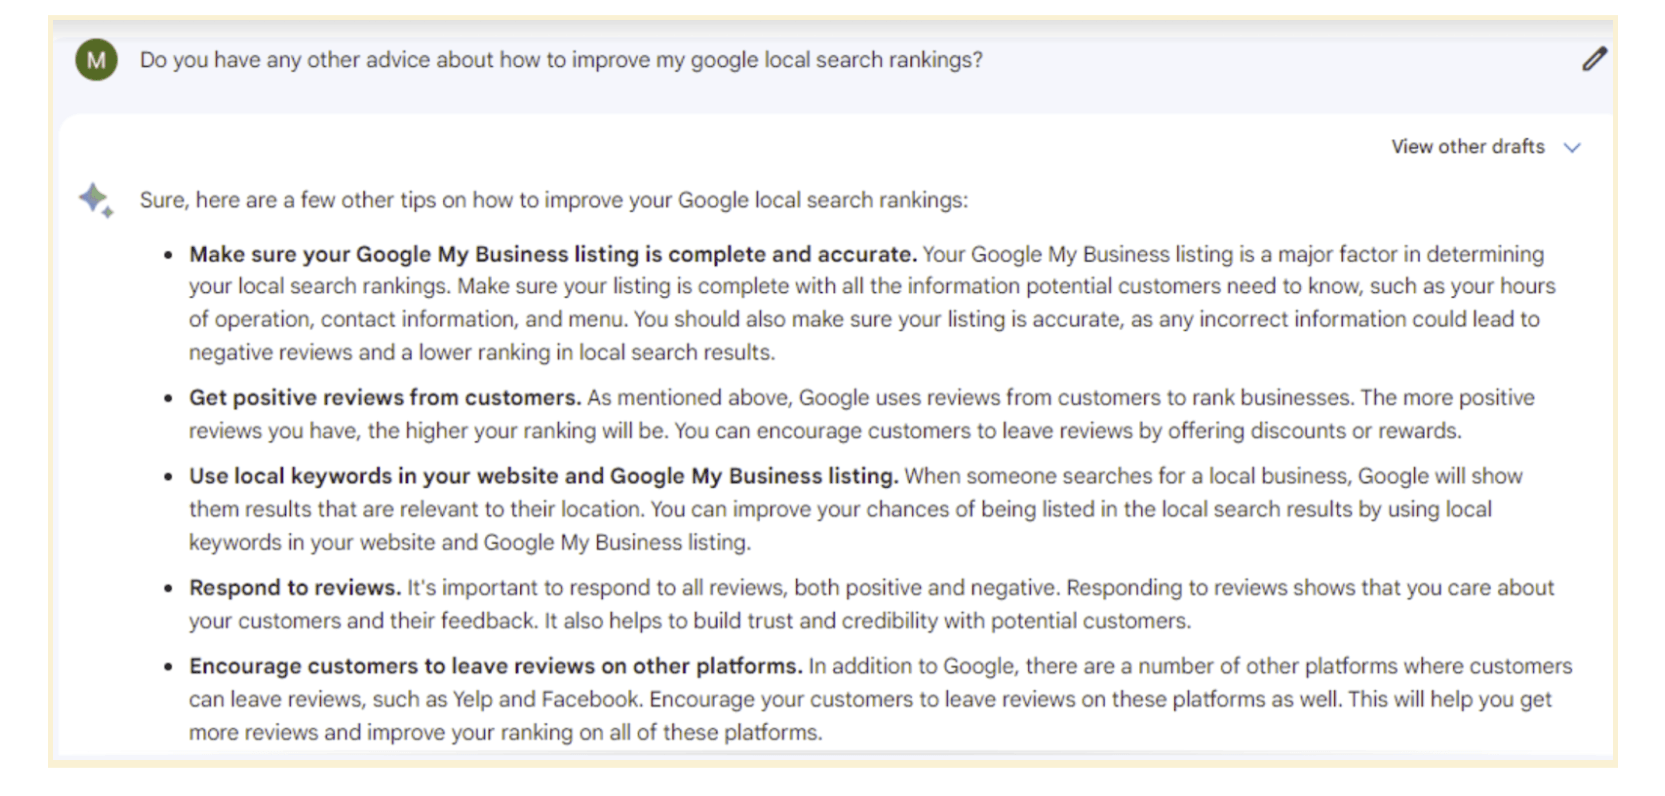 Bard explains how to improve Google local search rankings